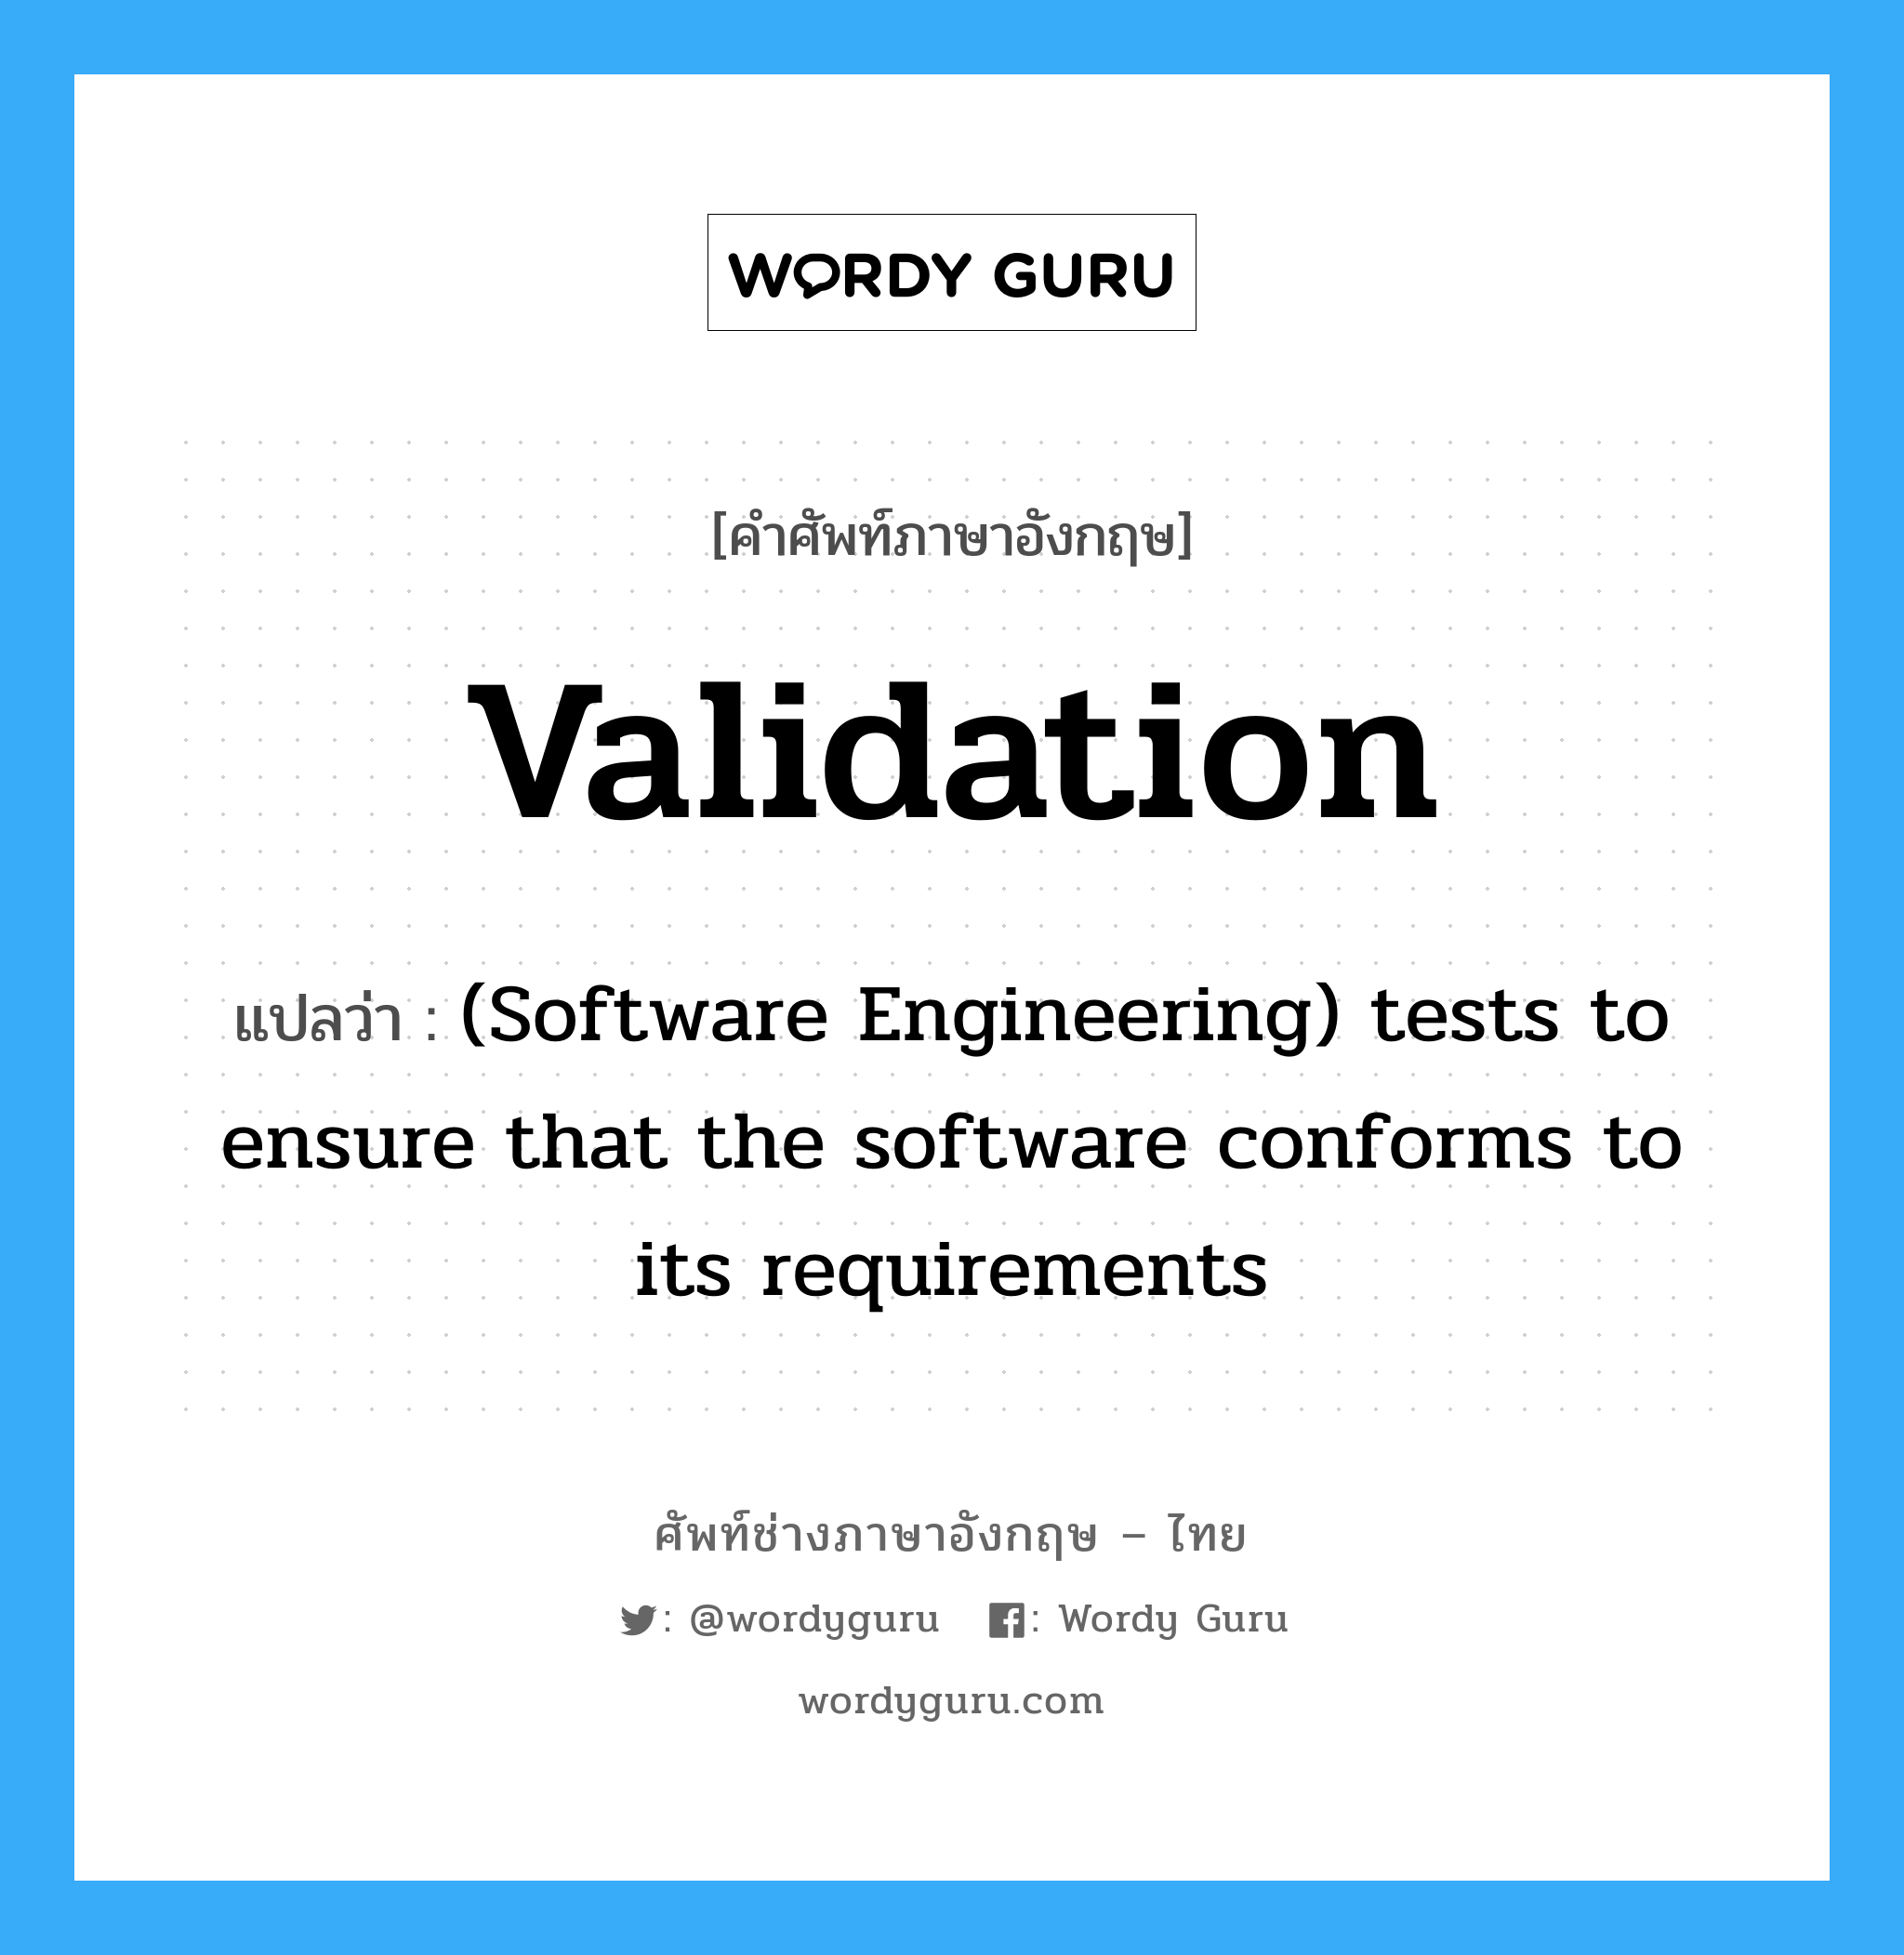 Validation แปลว่า?, คำศัพท์ช่างภาษาอังกฤษ - ไทย Validation คำศัพท์ภาษาอังกฤษ Validation แปลว่า (Software Engineering) tests to ensure that the software conforms to its requirements